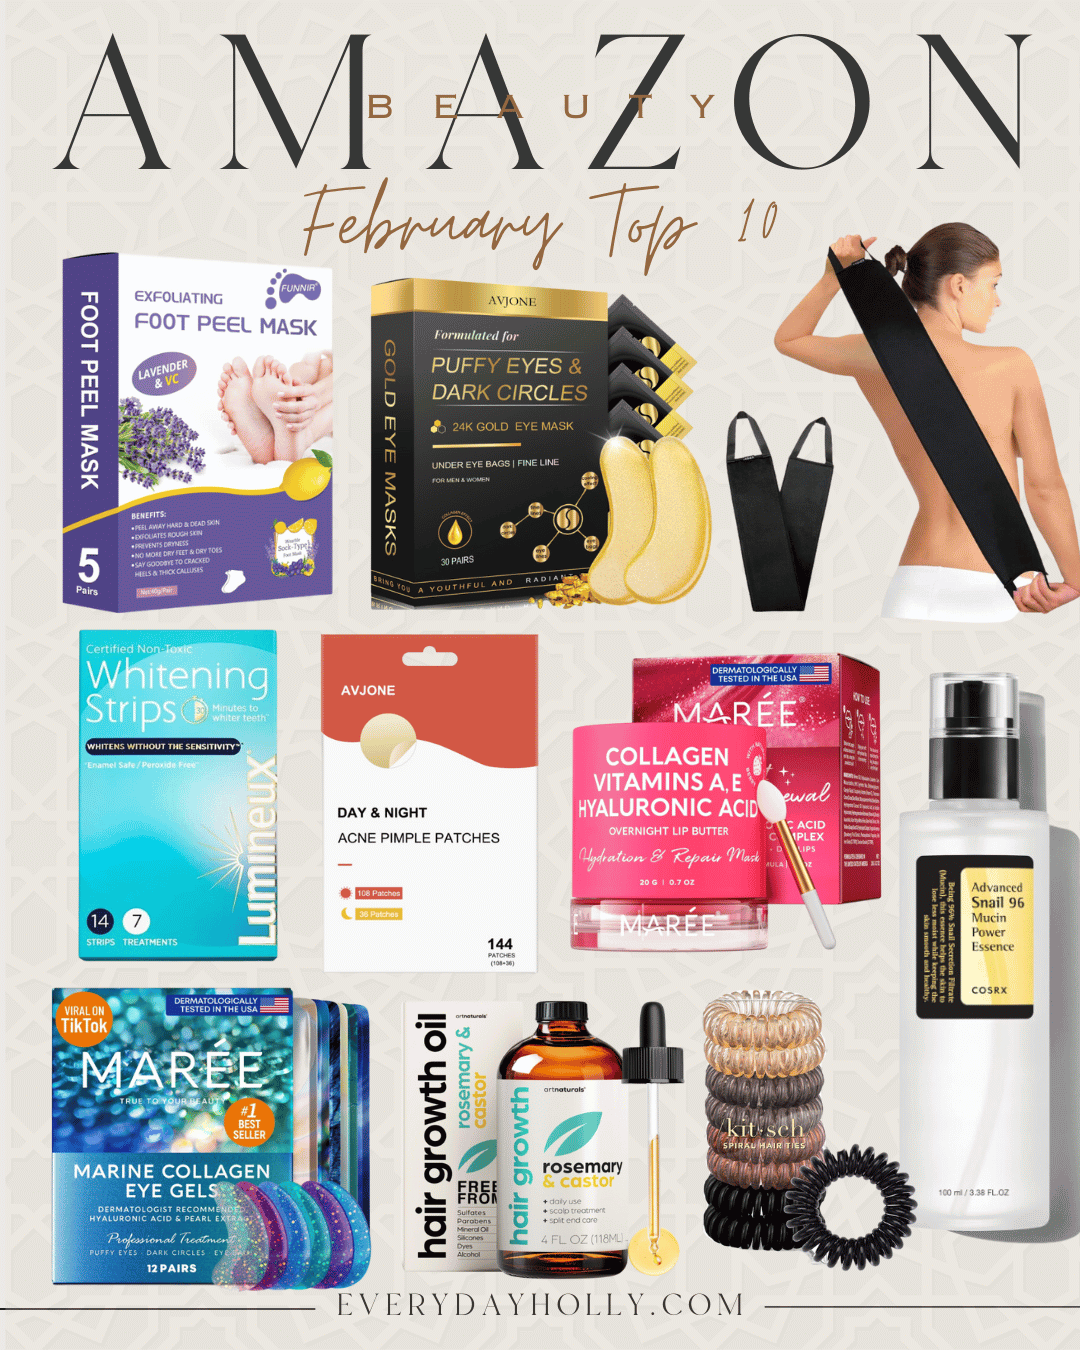 Top 10 Hottest Best Sellers from February | best sellers, fashion, beauty, home, monthly top sellers, amazon, February best sellers, beauty, skin care, self tanner, eye mask, teeth whitening, lip mask, hair tie, rosemary oil